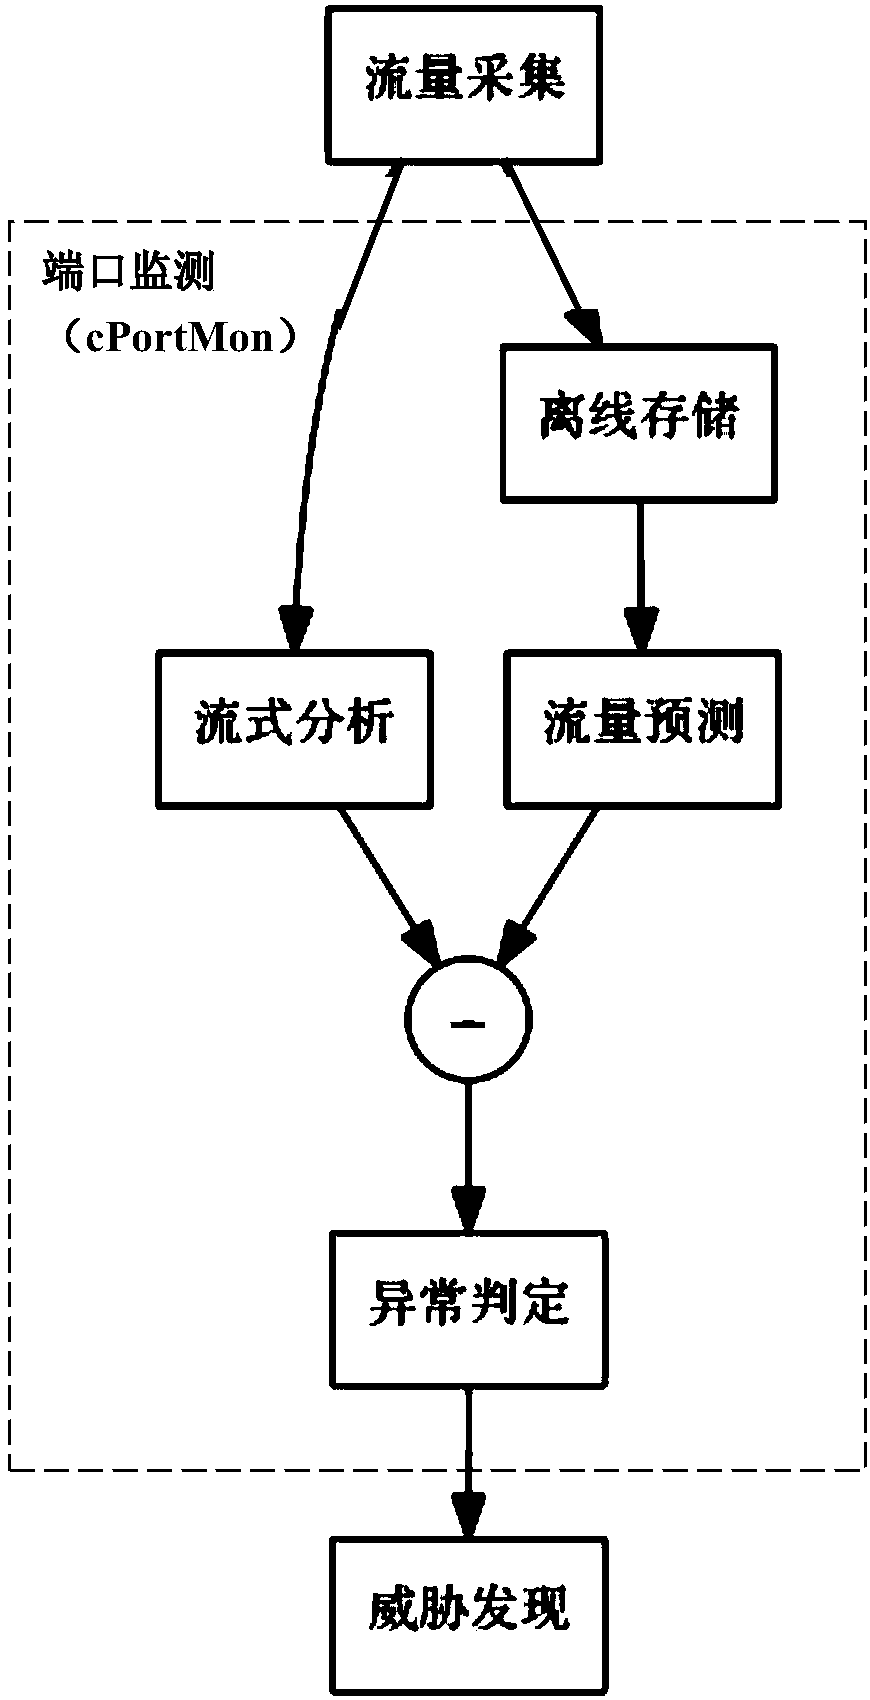 Network port traffic abnormality detection method and system